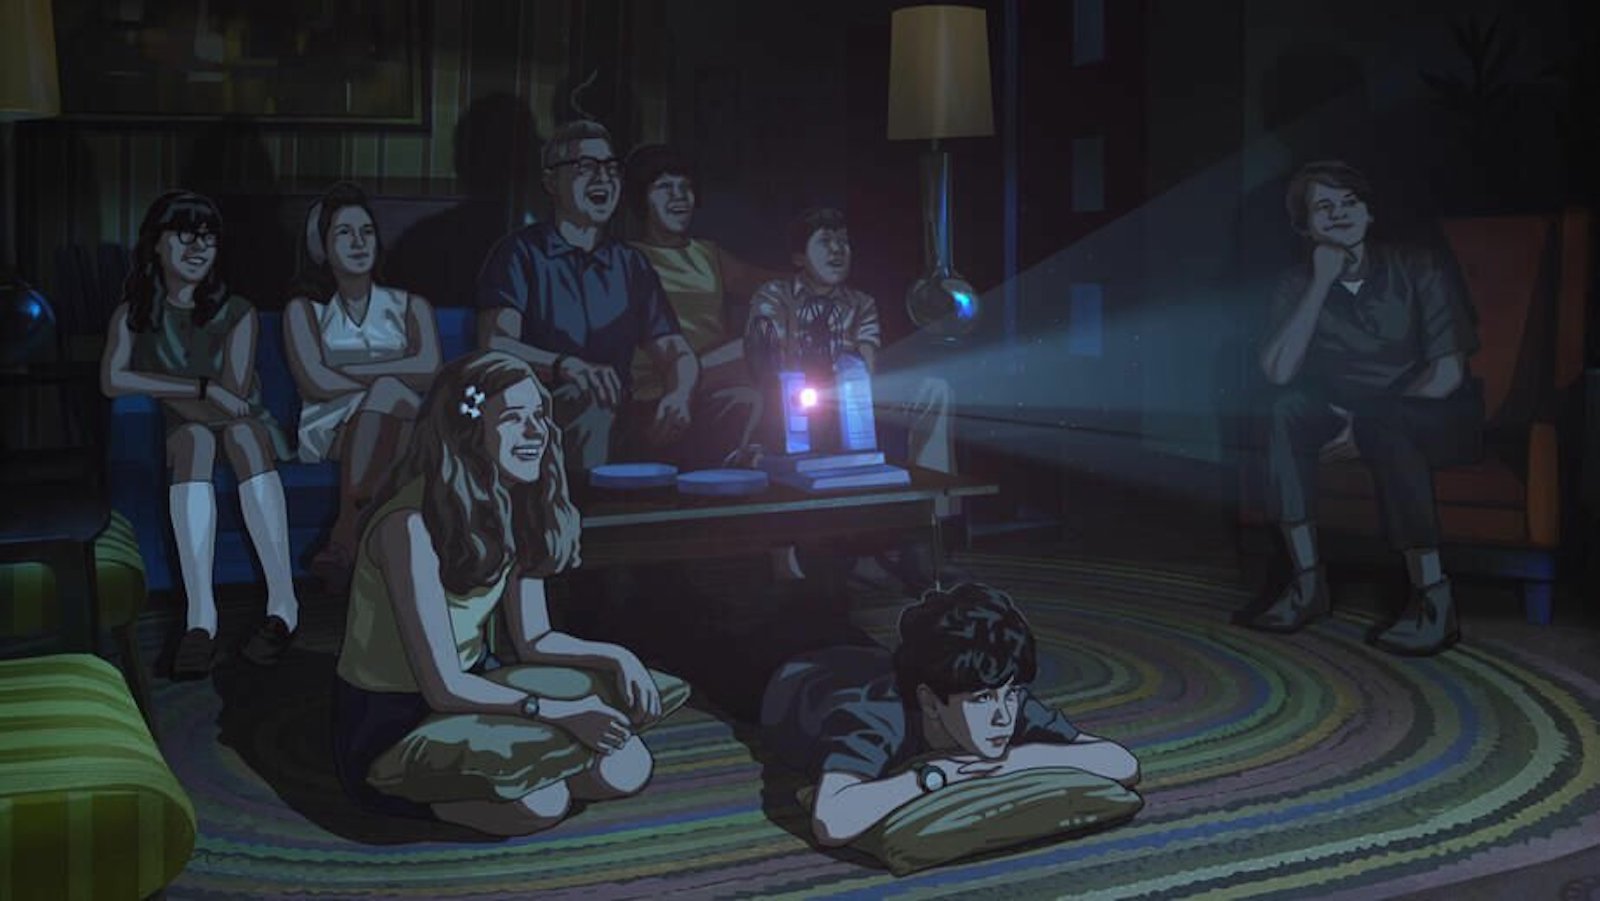 An animated image of a family watching projected film on a wall